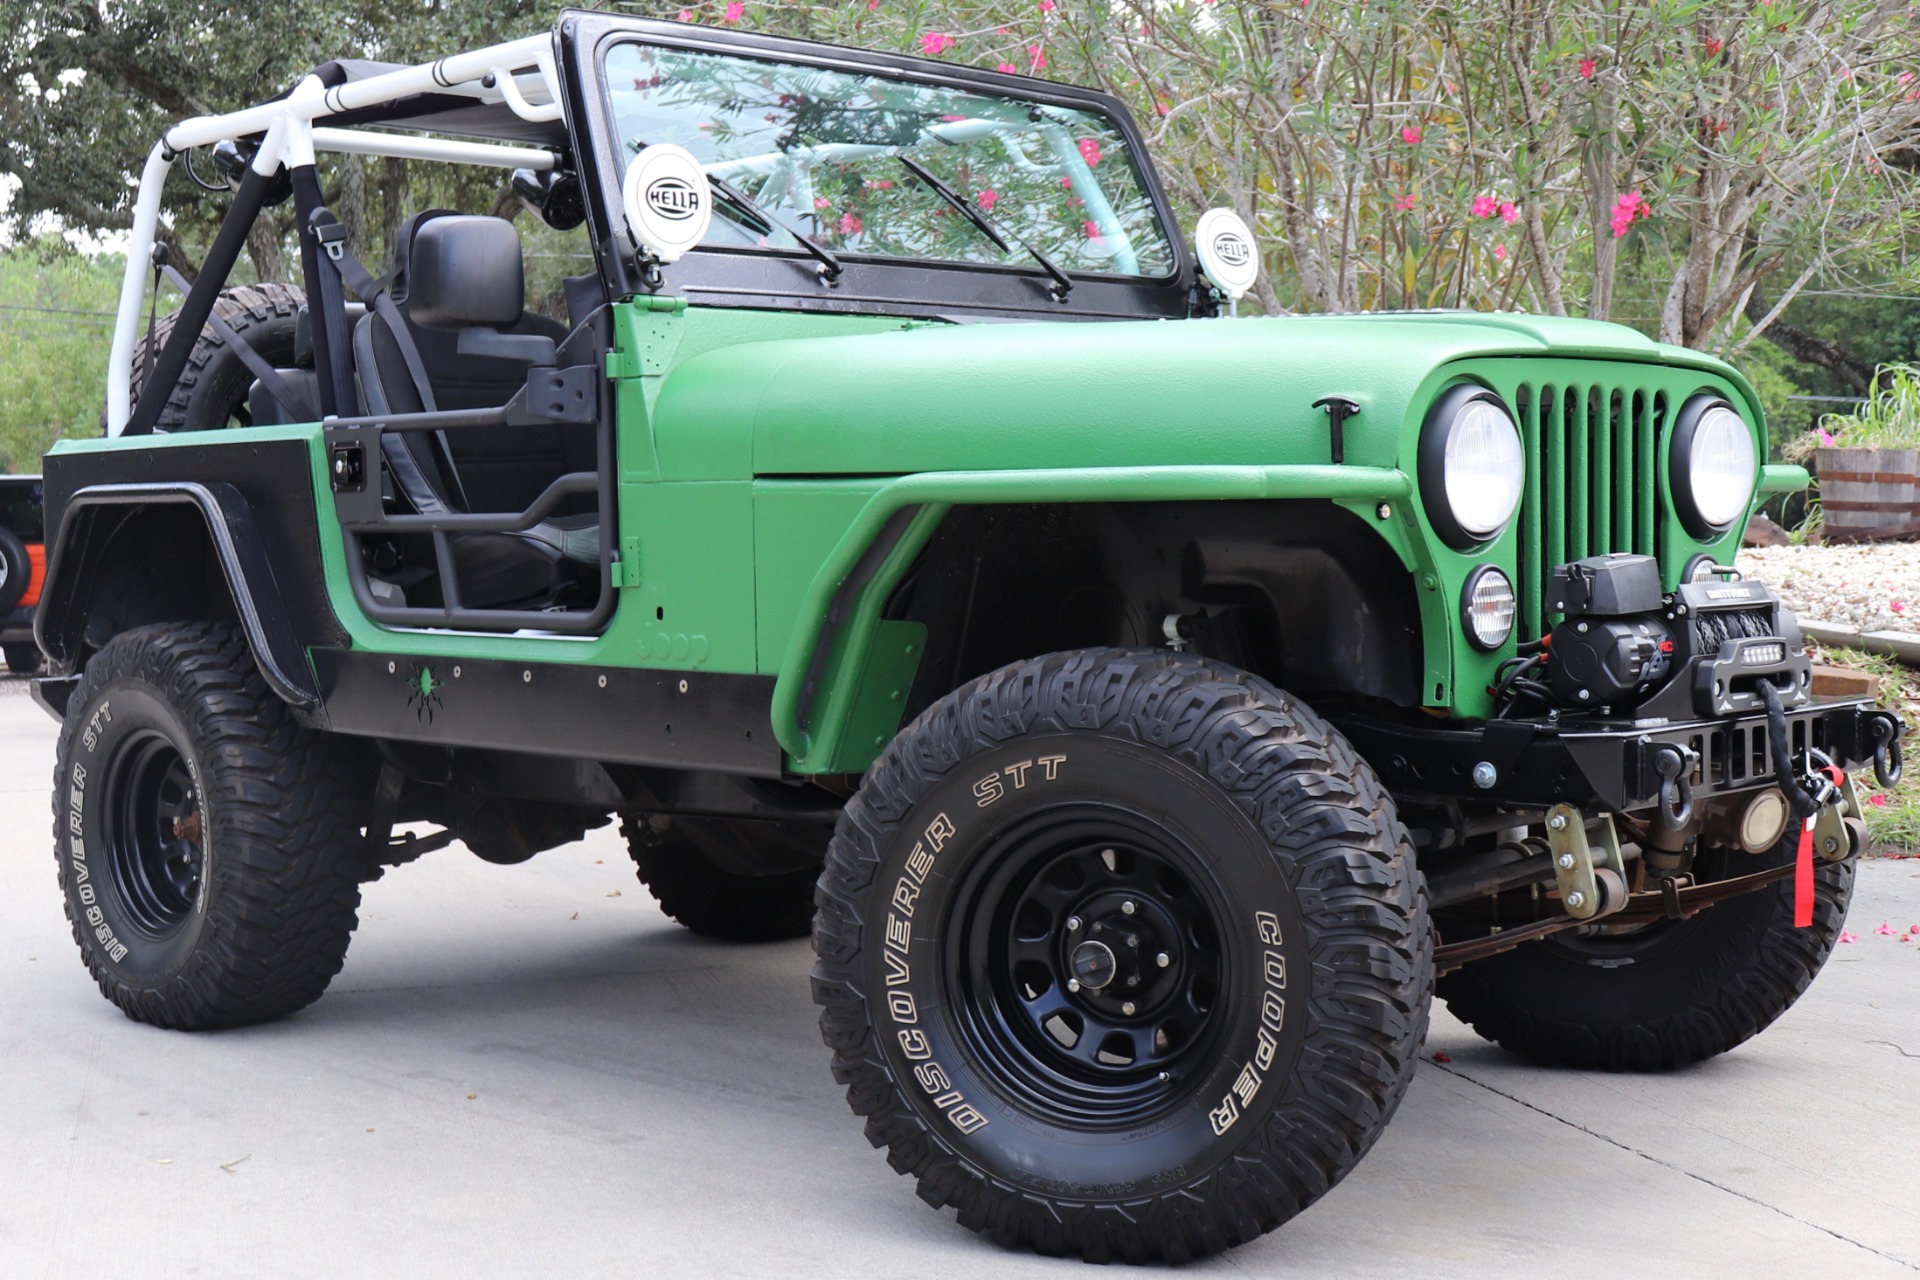 Used 1984 Jeep CJ-7 For Sale ($15,995) | Select Jeeps Inc. Stock #142600